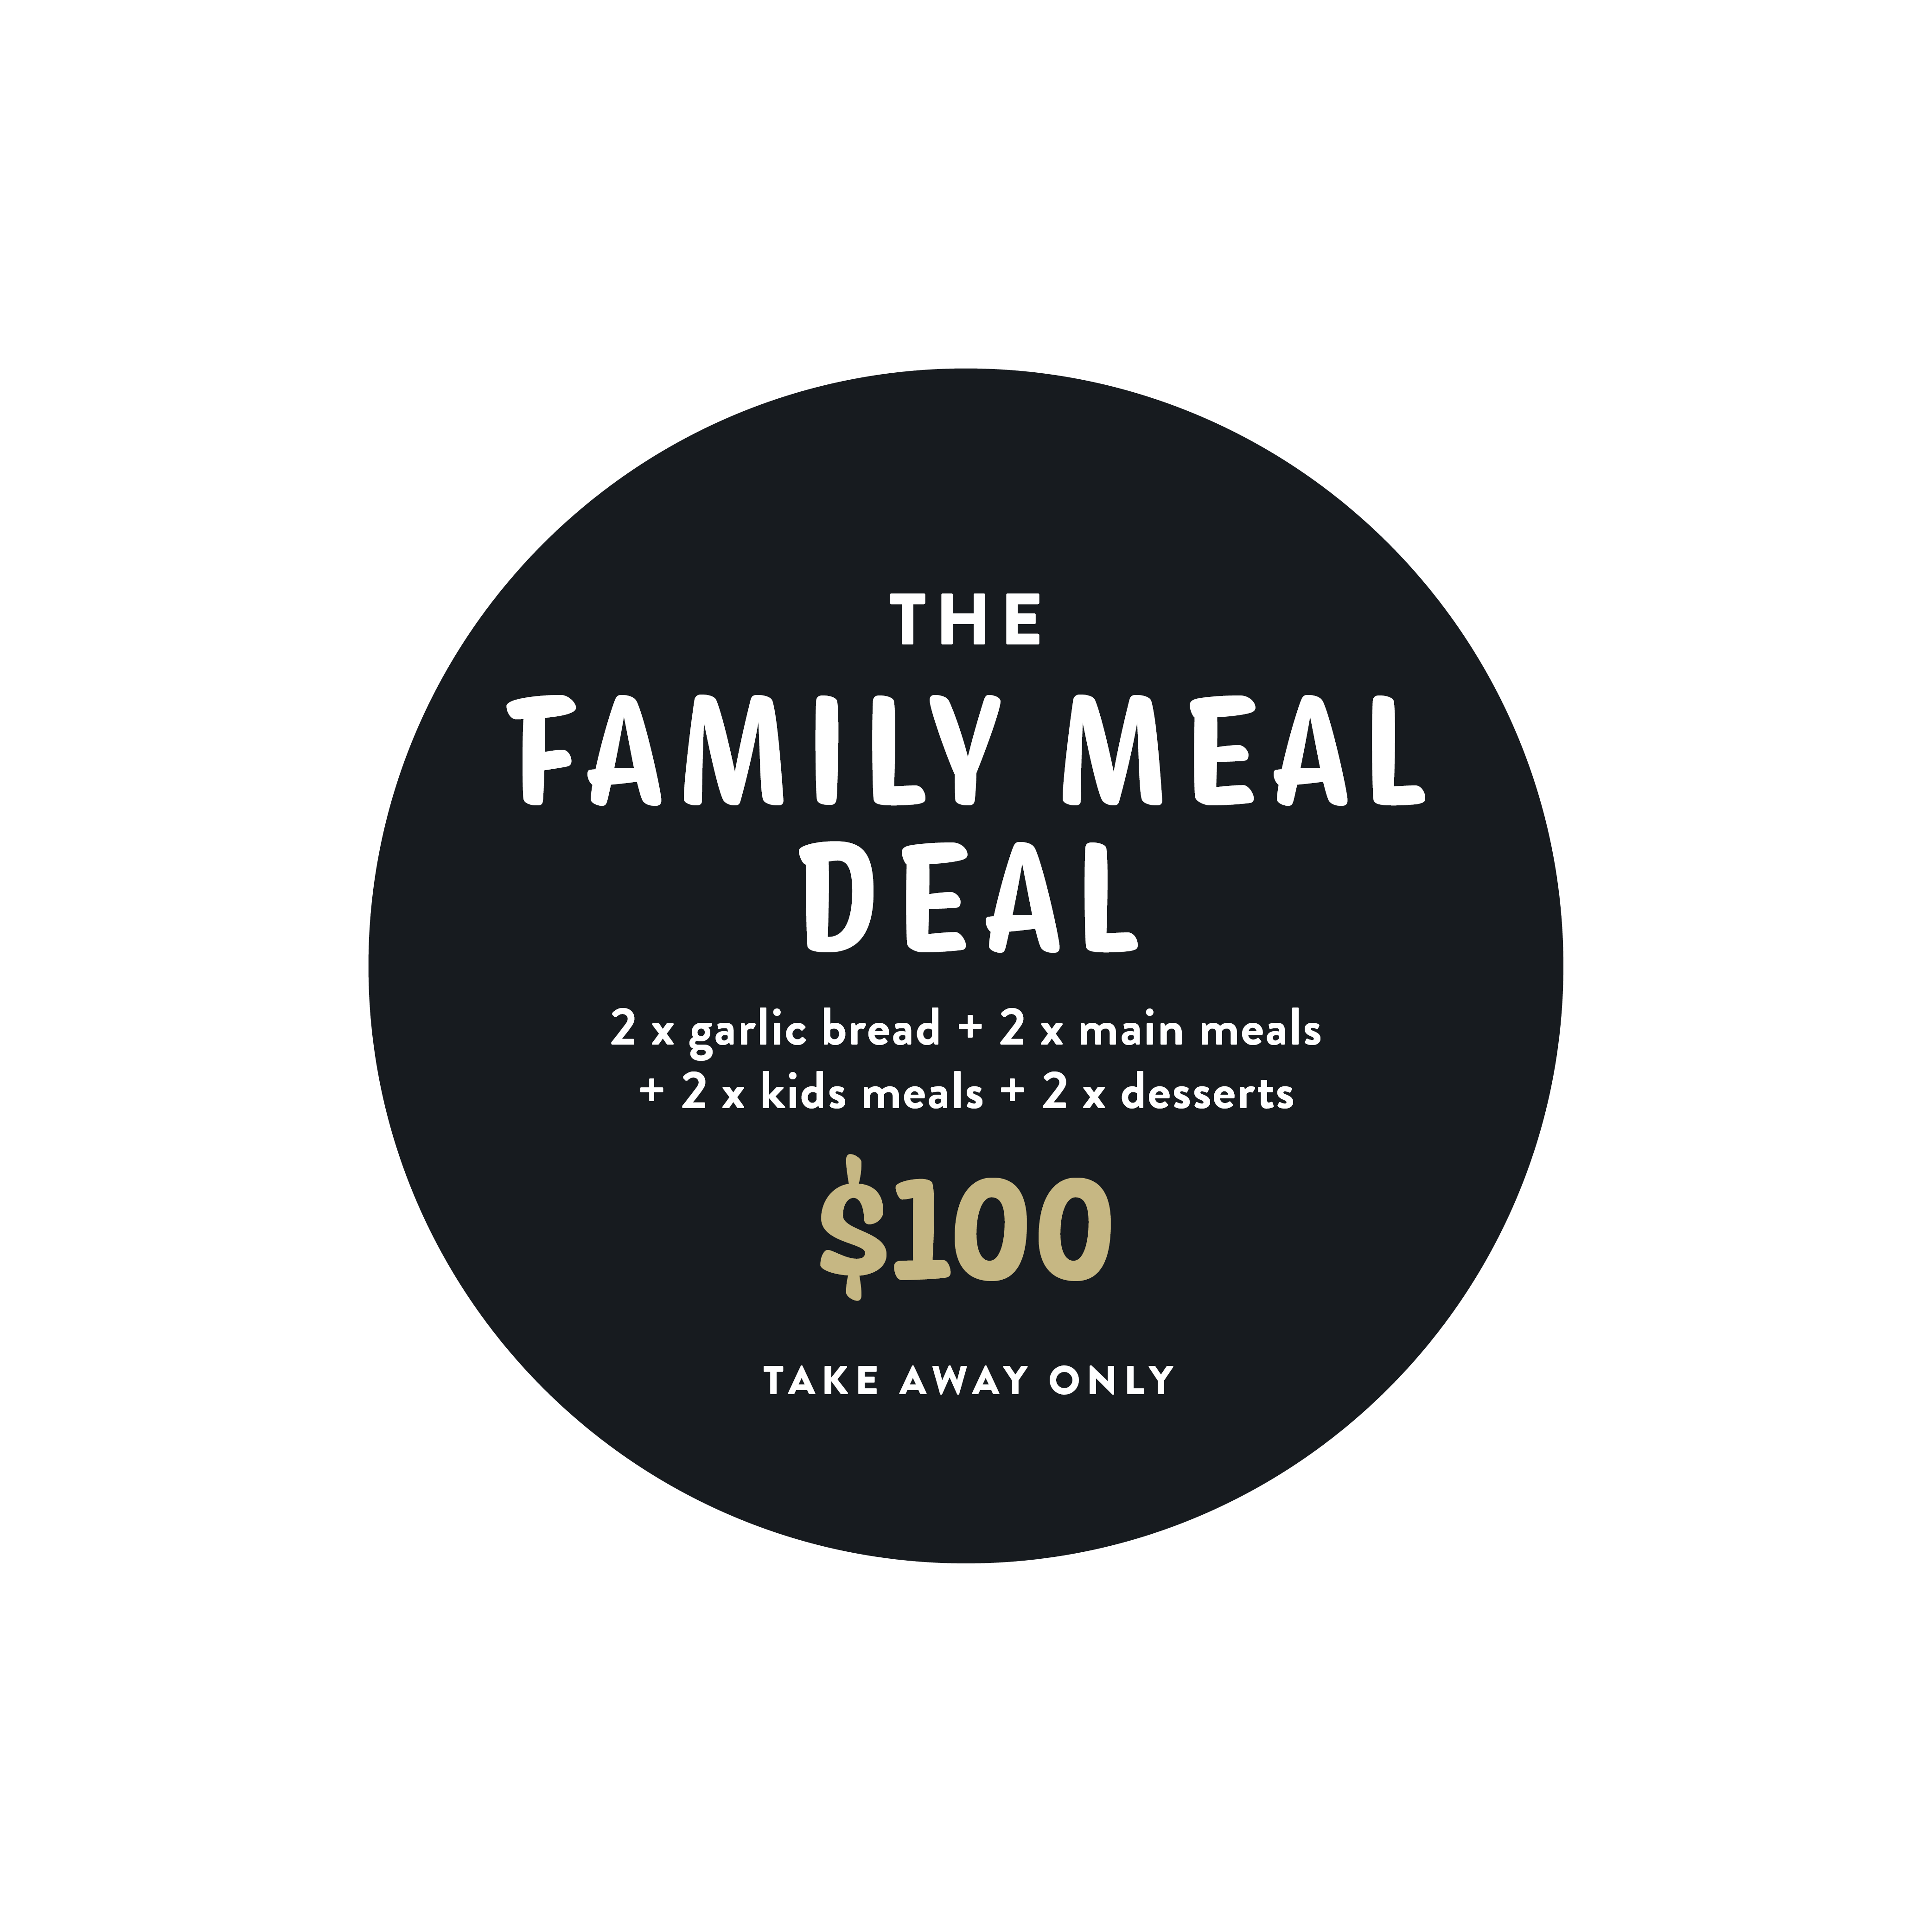 Family meal deal - take away only